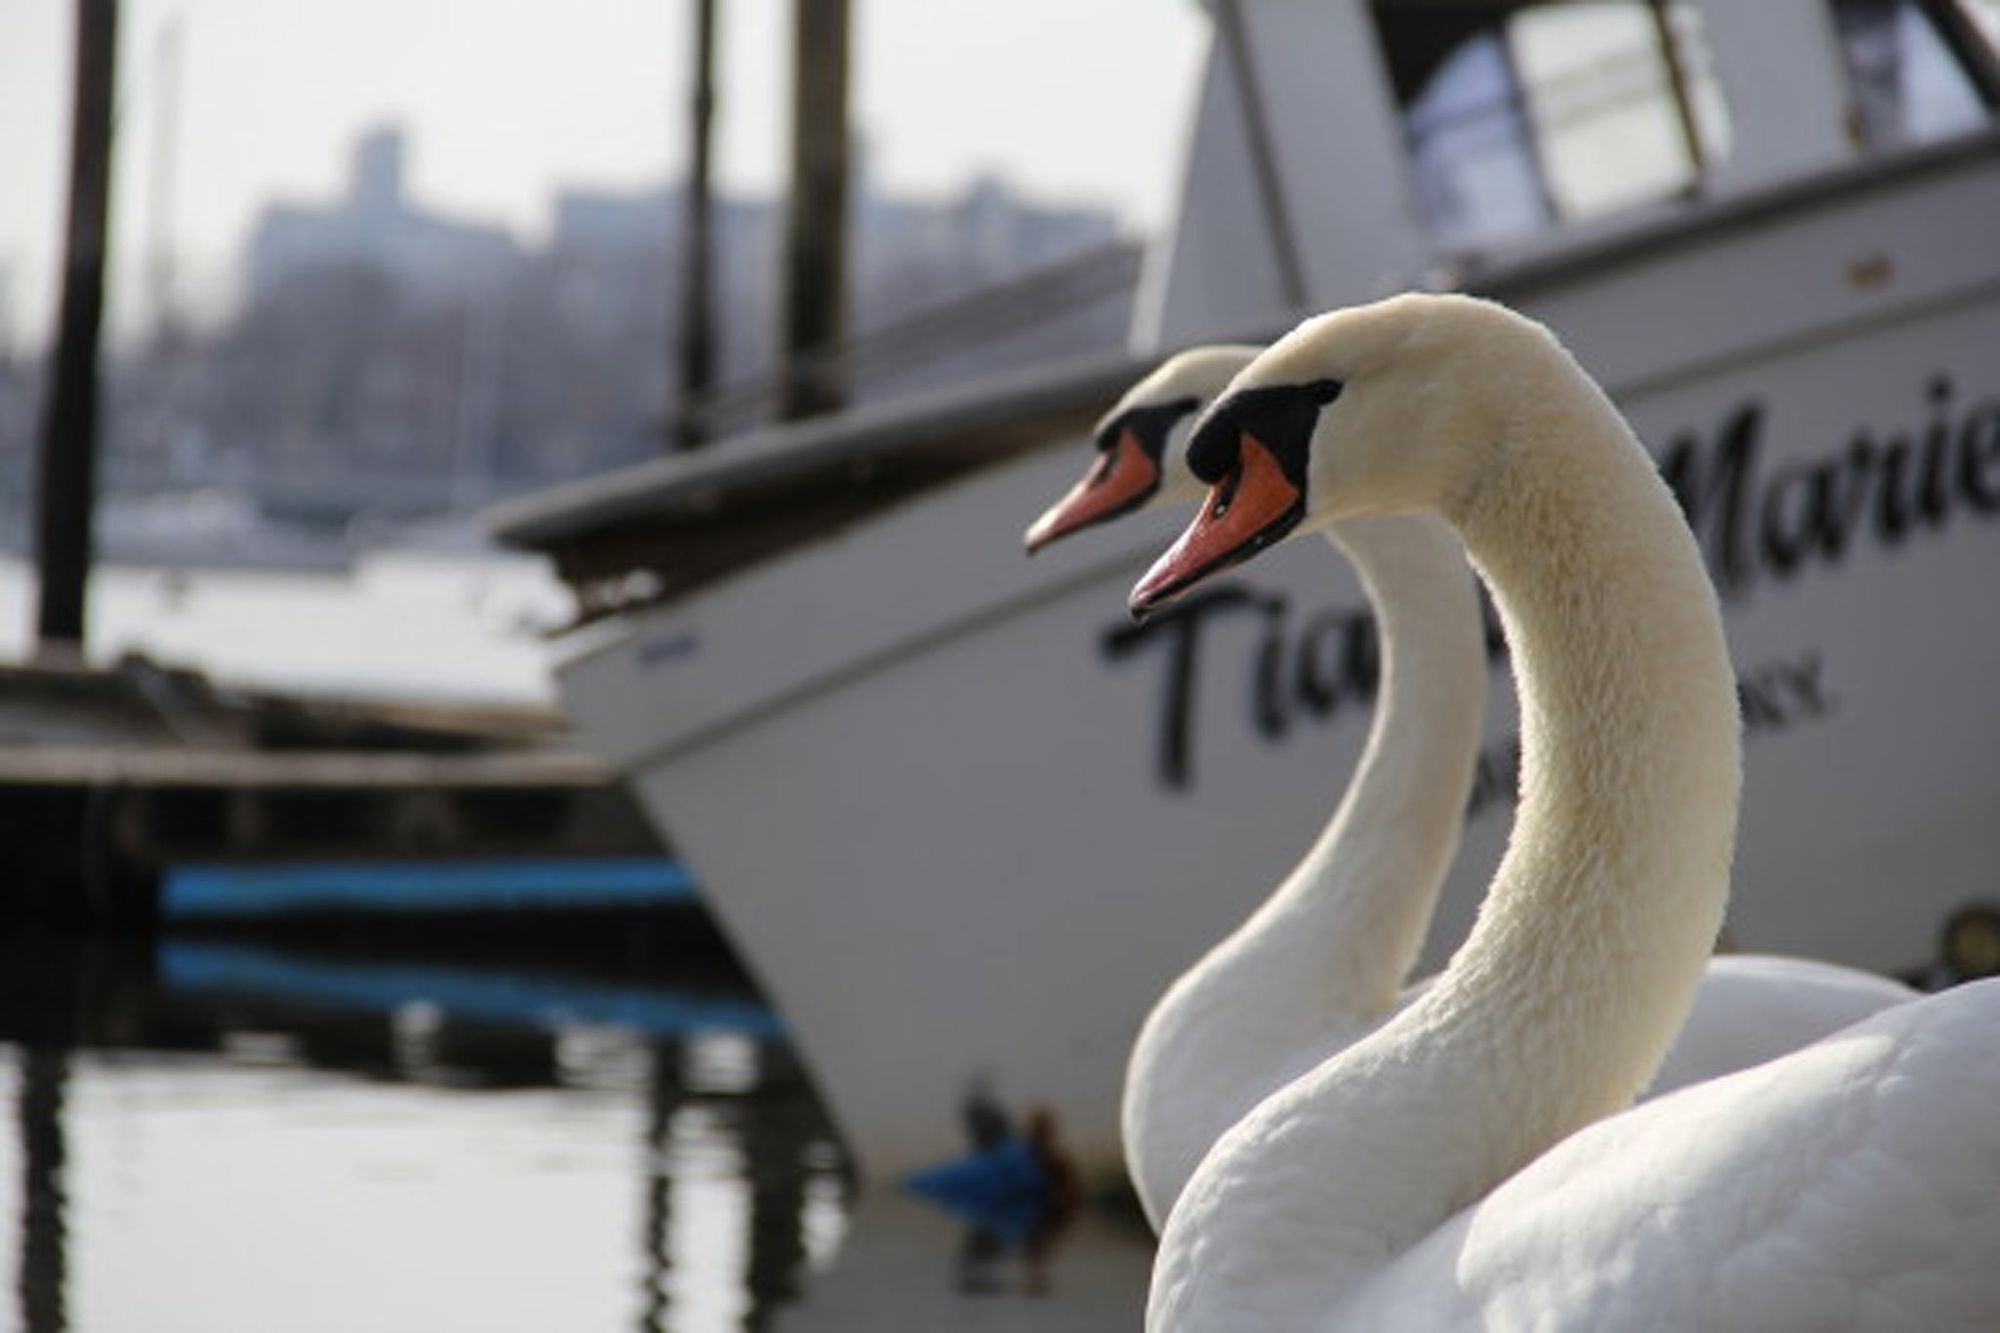 Sheepshead Bay’s Iconic Swans Back On State’s Kill List, Sort Of